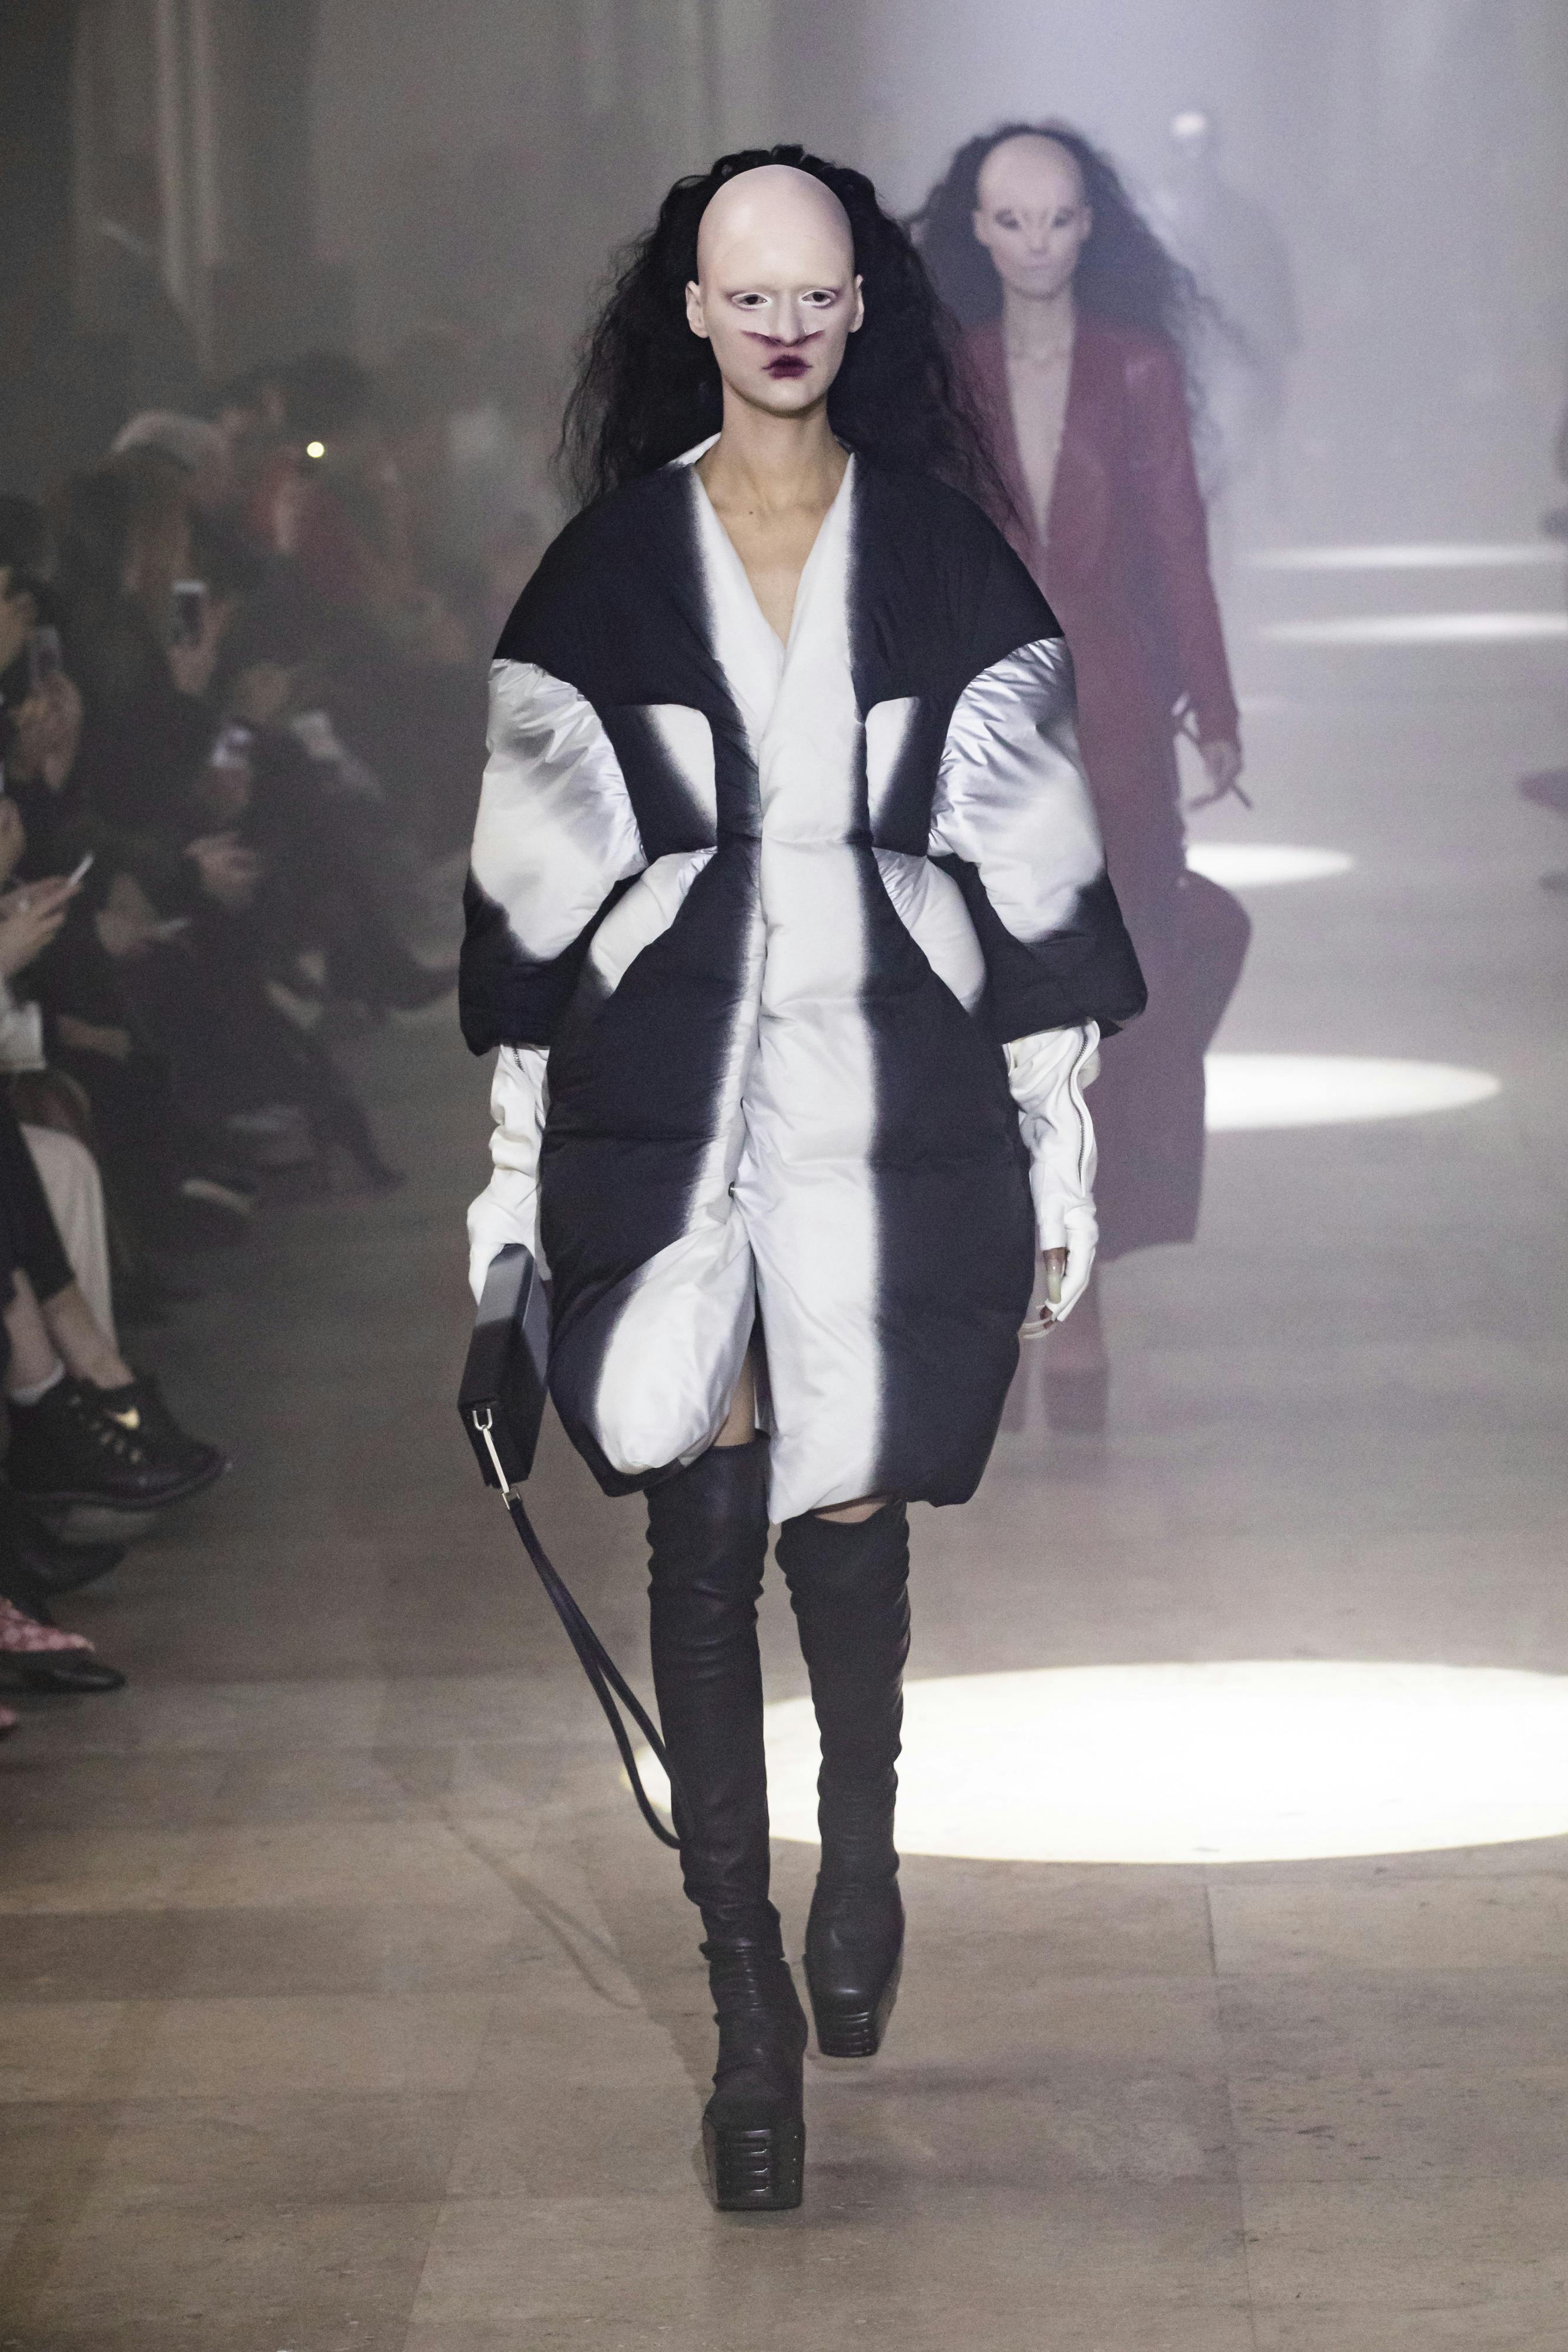 Rick Owens Runway Black Silver Toned Puffer Coat Black High Kiss Grill Leather Boots Black Clutch Bag Womens FW19 Larry